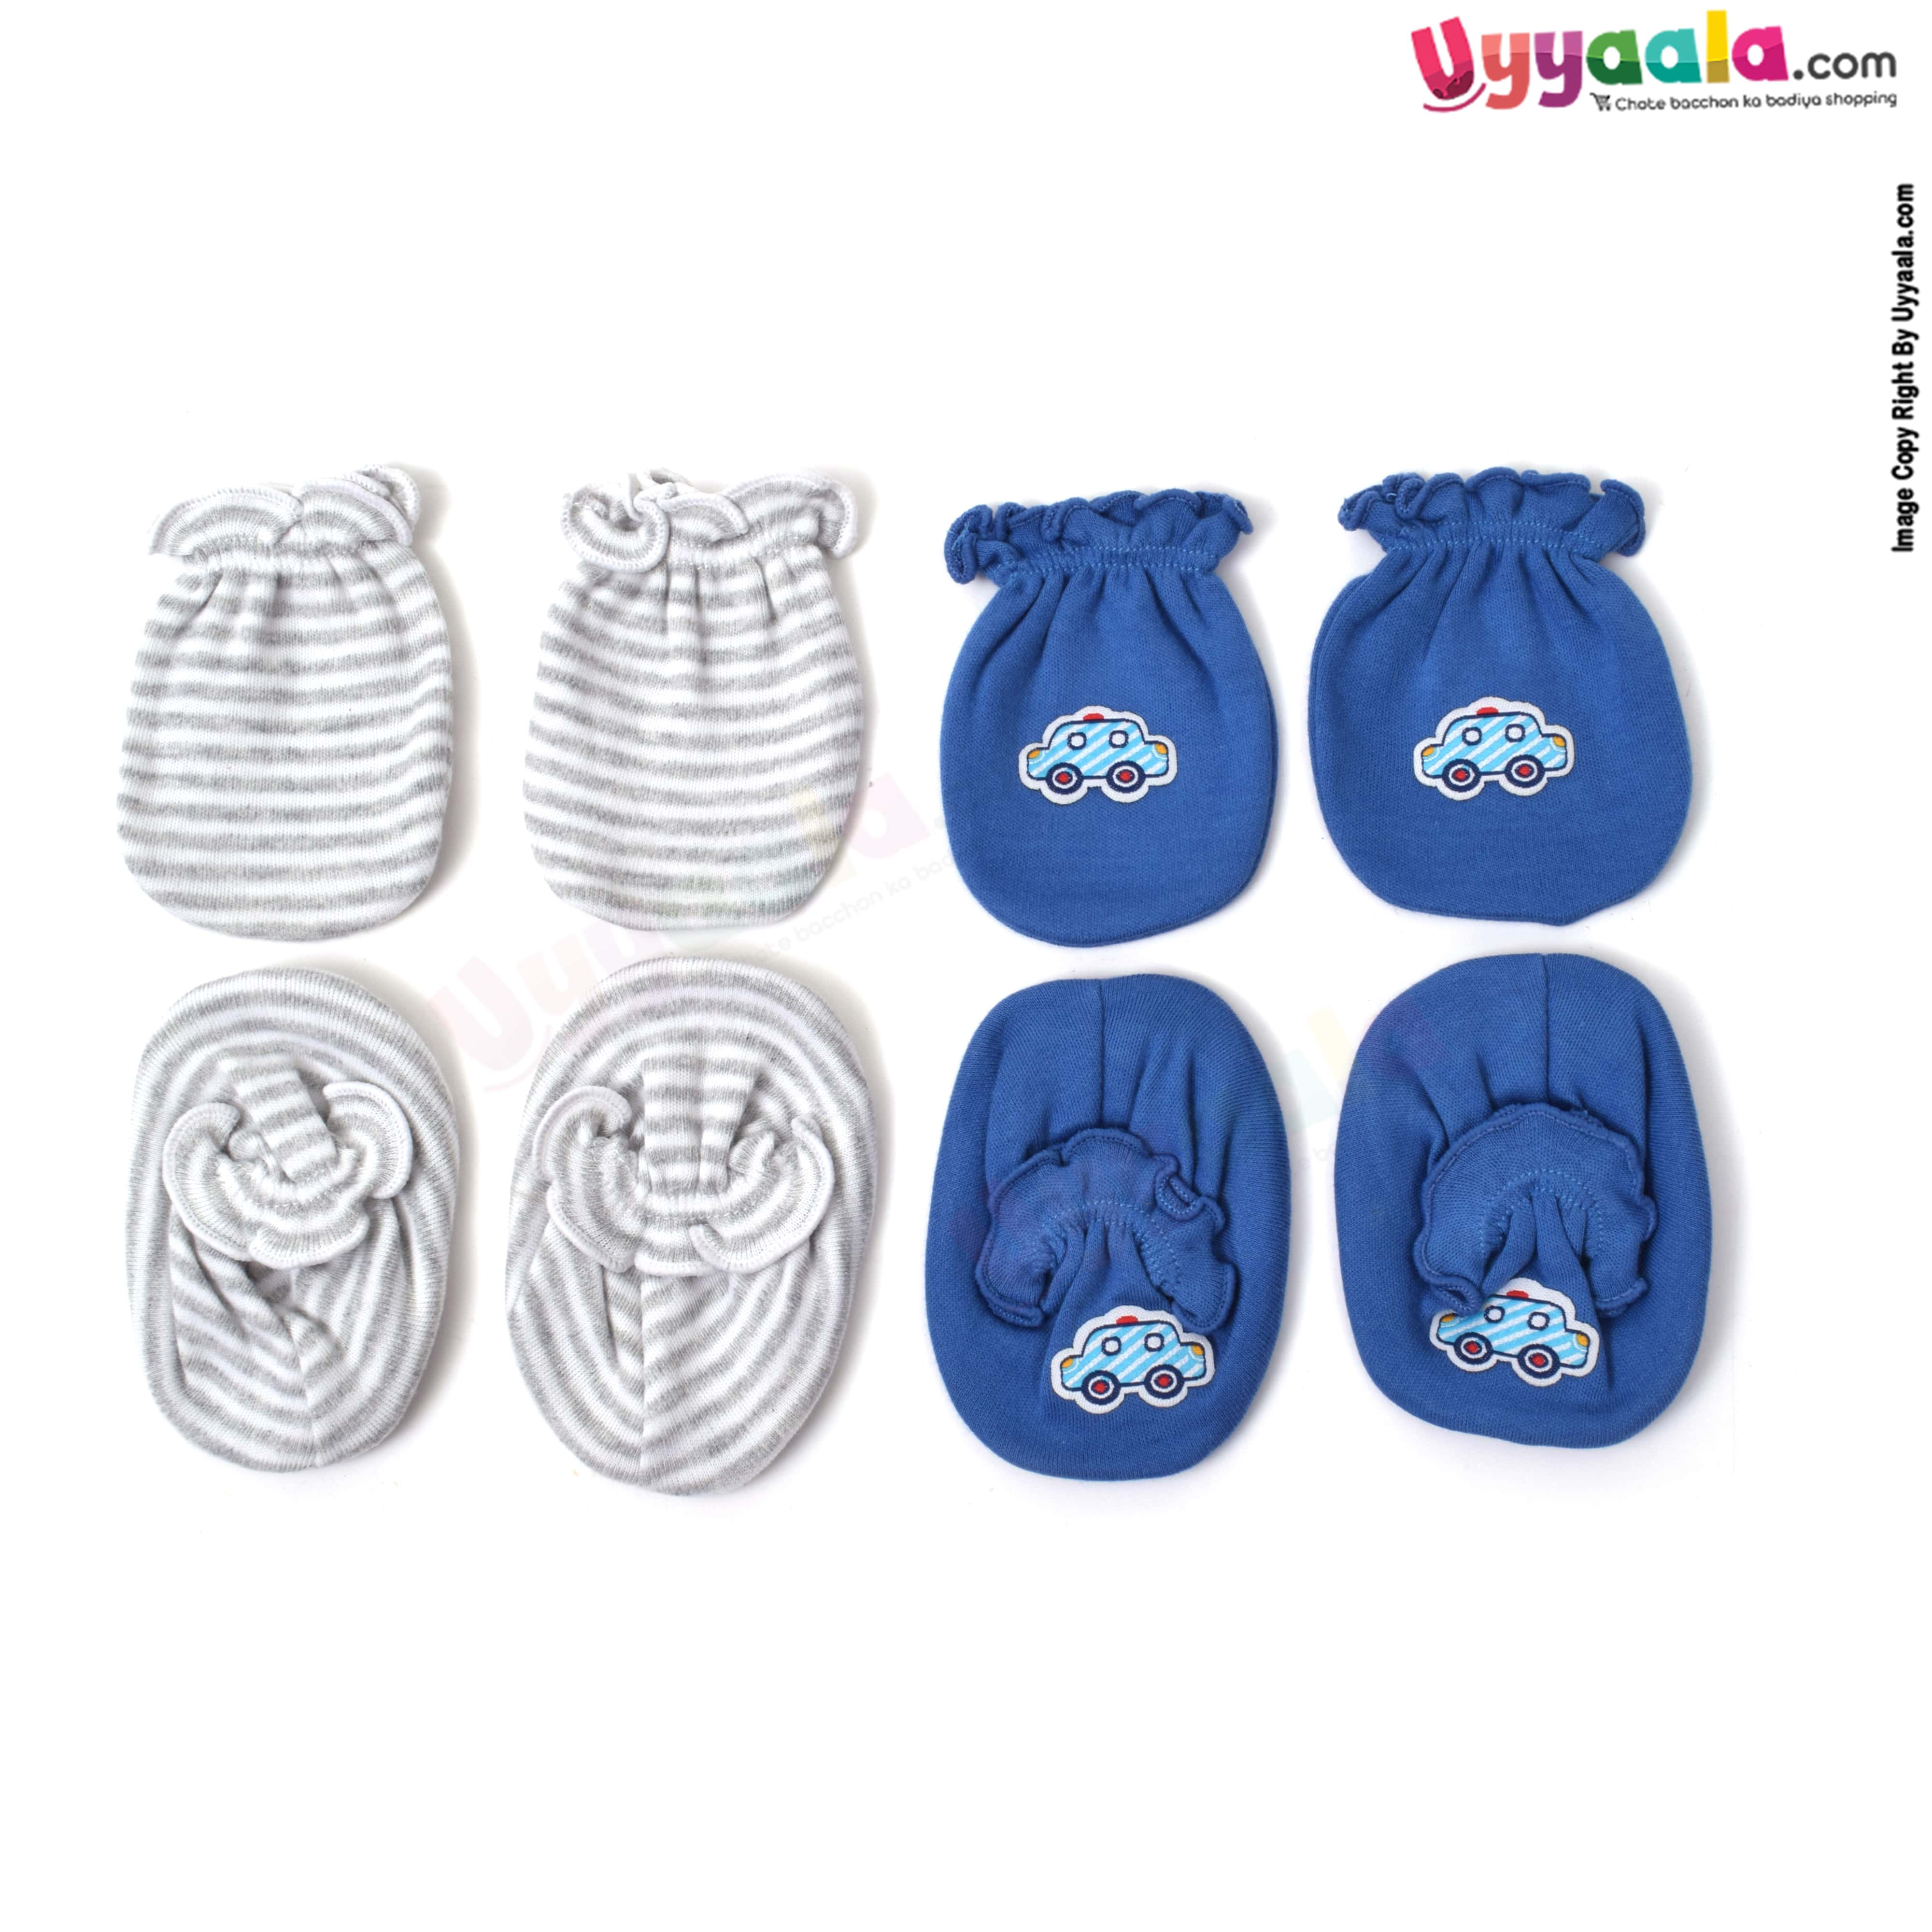 BEN BENNY mittens & booties set for babies, grey color stripes and car print (0-3 M) - blue & grey